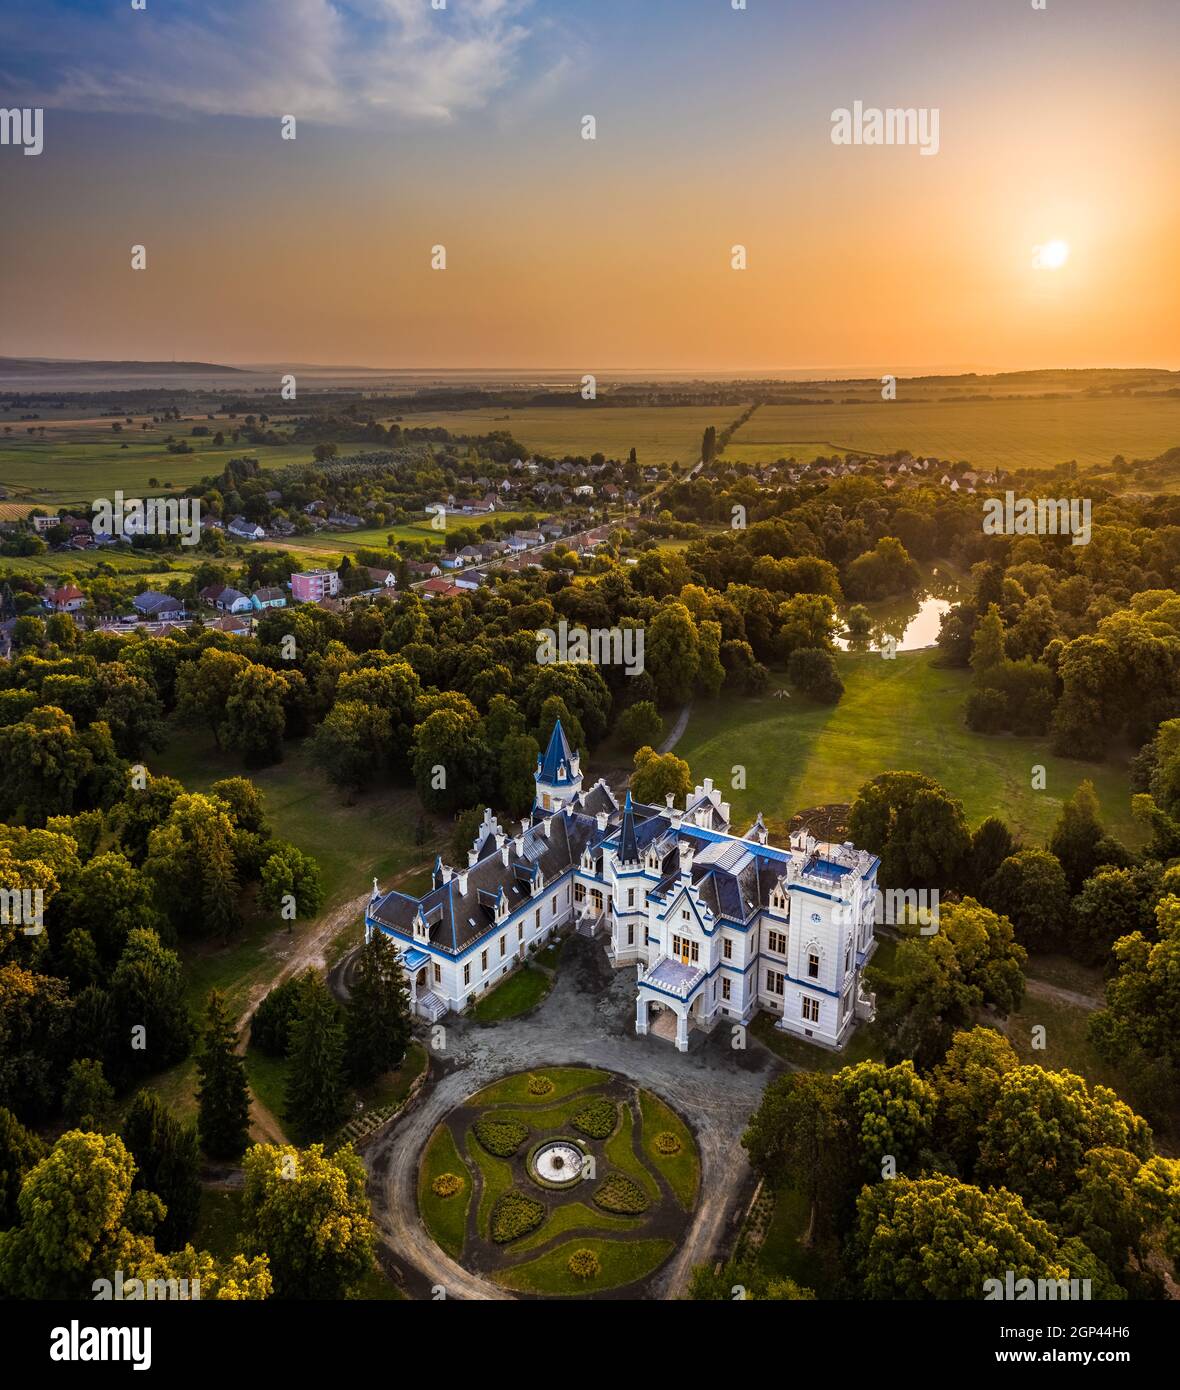 Nadasdladany, Hungary - Aerial view of the beautiful renovated Nadasdy Mansion (Nadasdy-kastely) at the small village of Nadasdladany with rising sun, Stock Photo